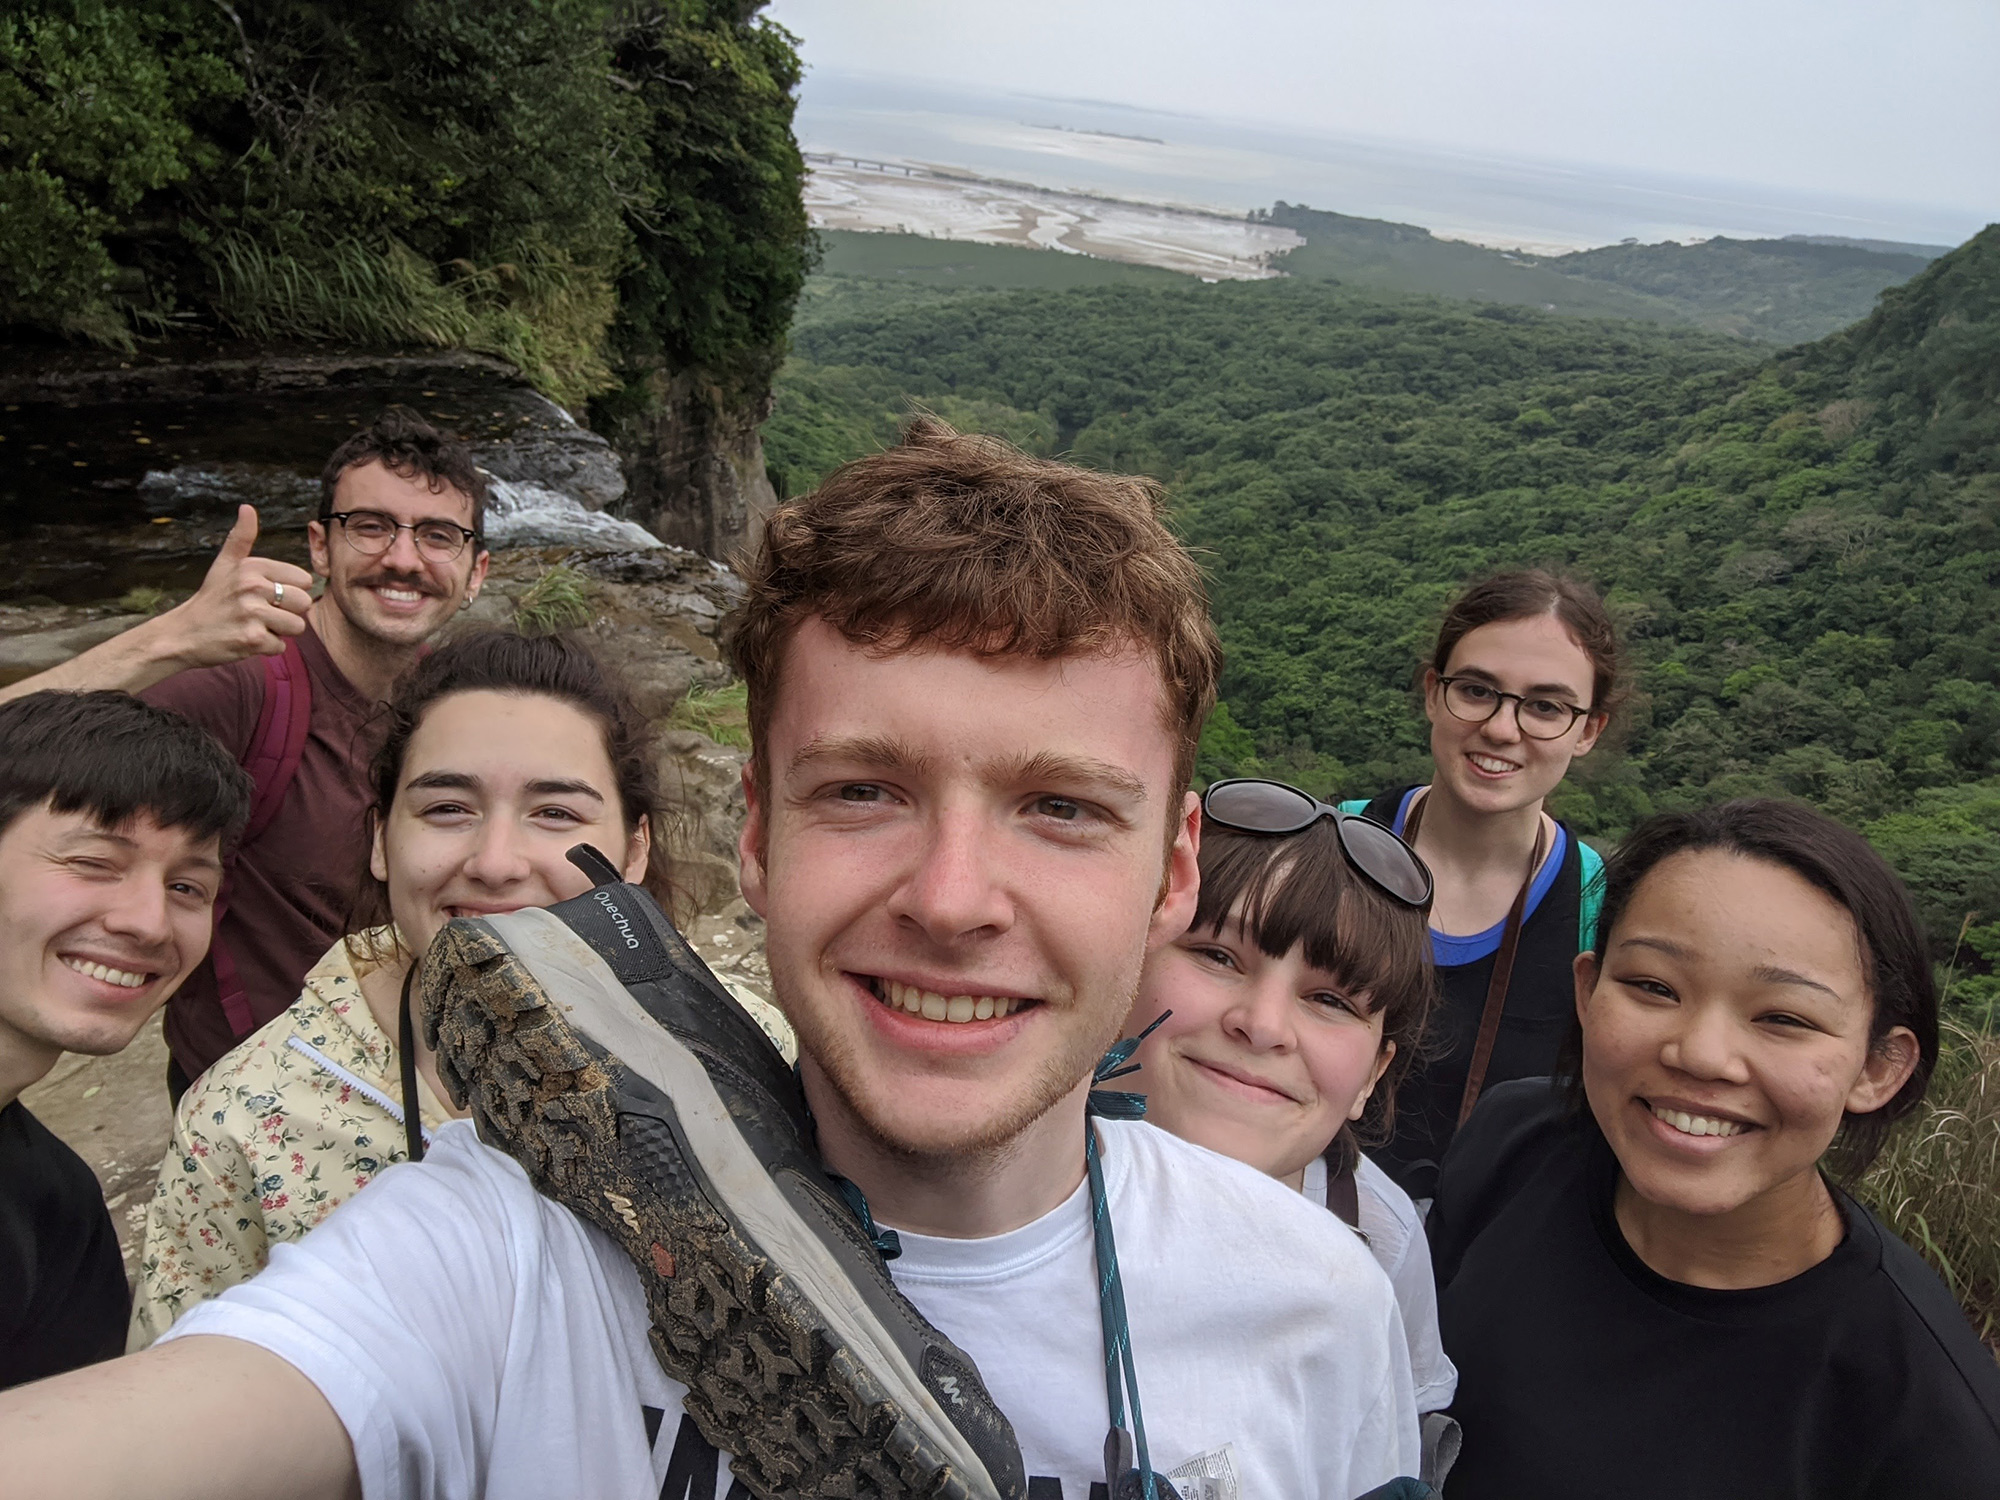 Calum Bell selfie with friends in the jungle on the Okinawan island of Iriomote